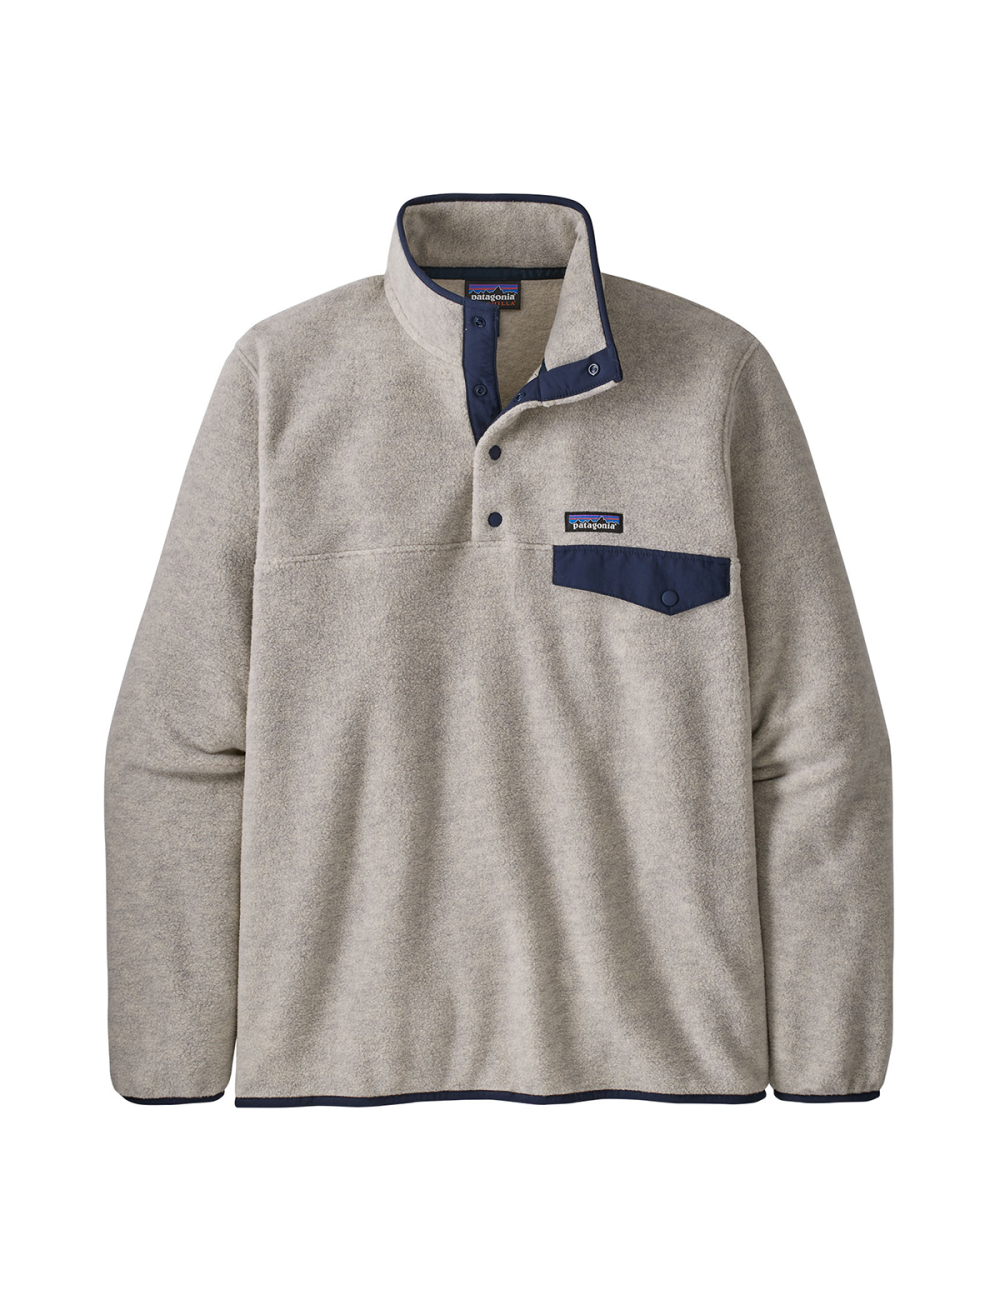 Patagonia Synch Snap Pullover - Outmeal Heather